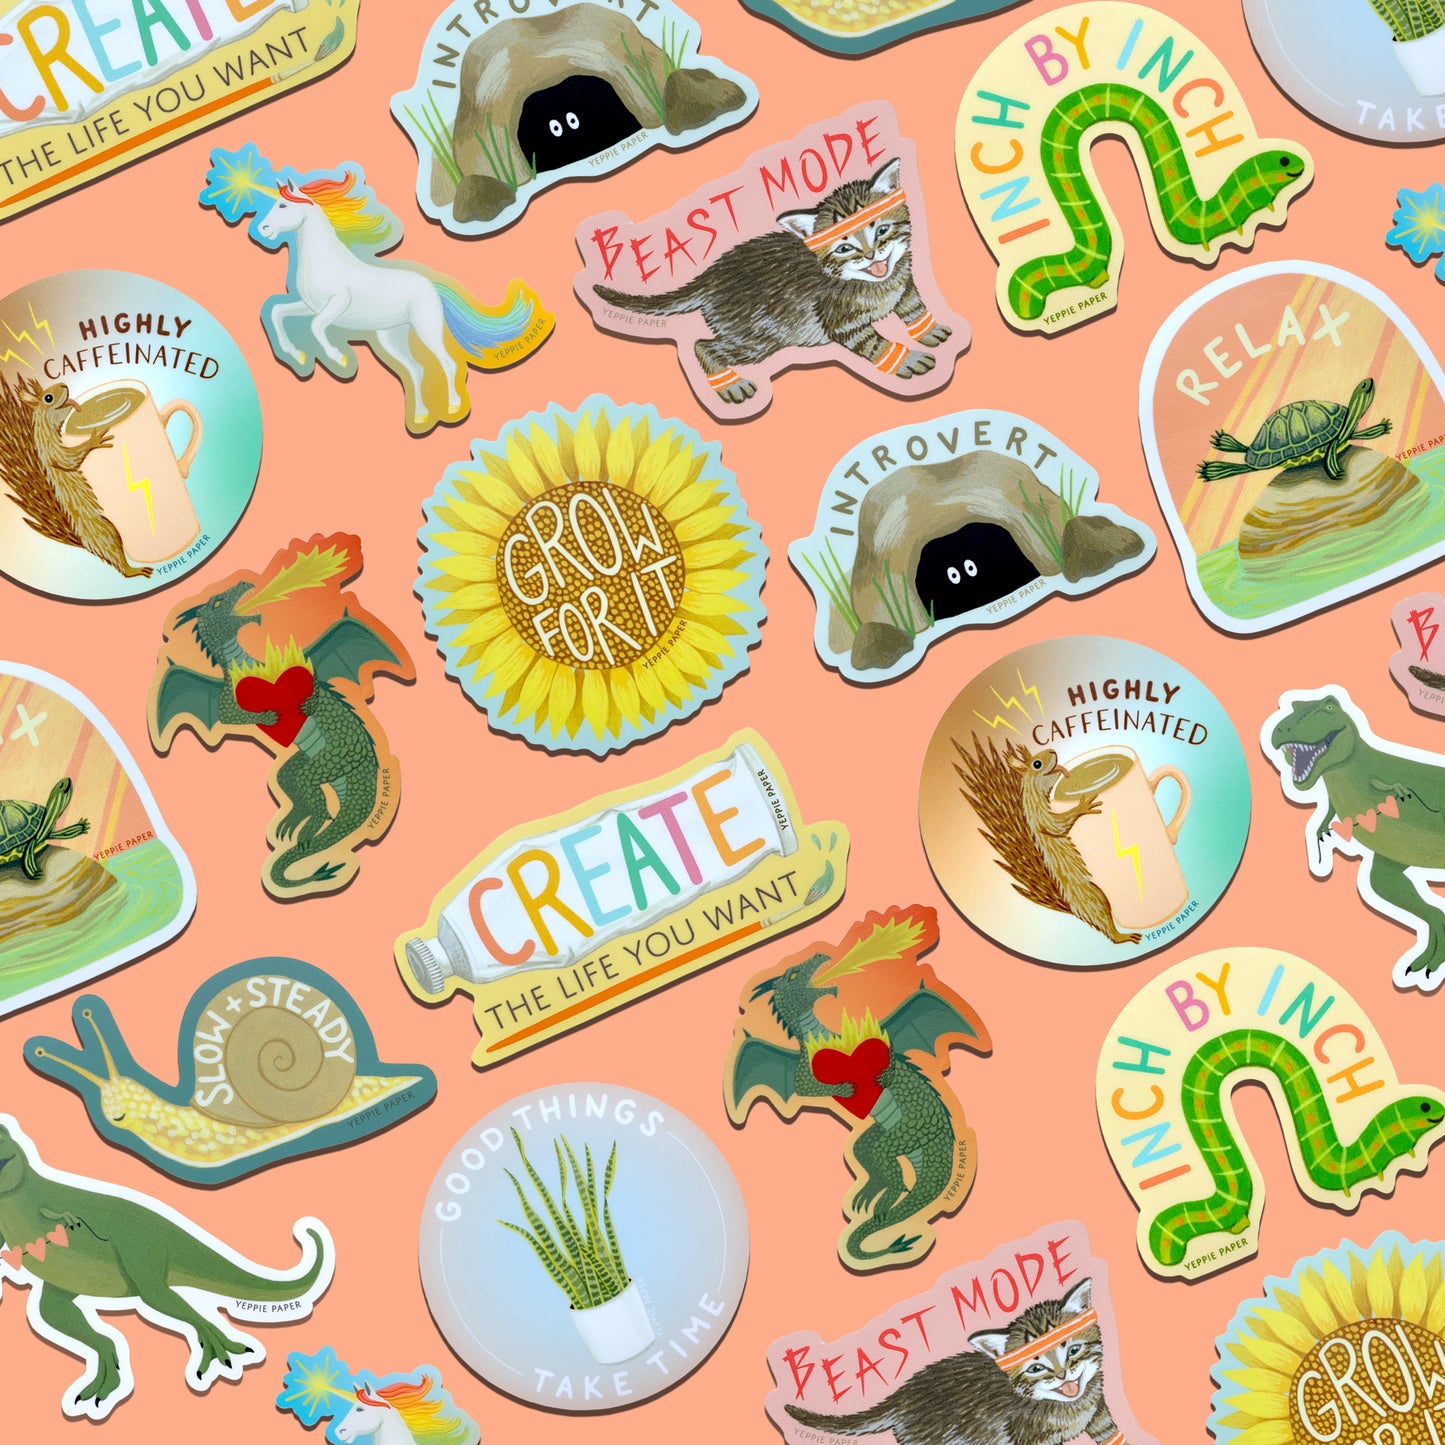 PICK ANY 3 DIE-CUT STICKERS - YOUR CHOICE!